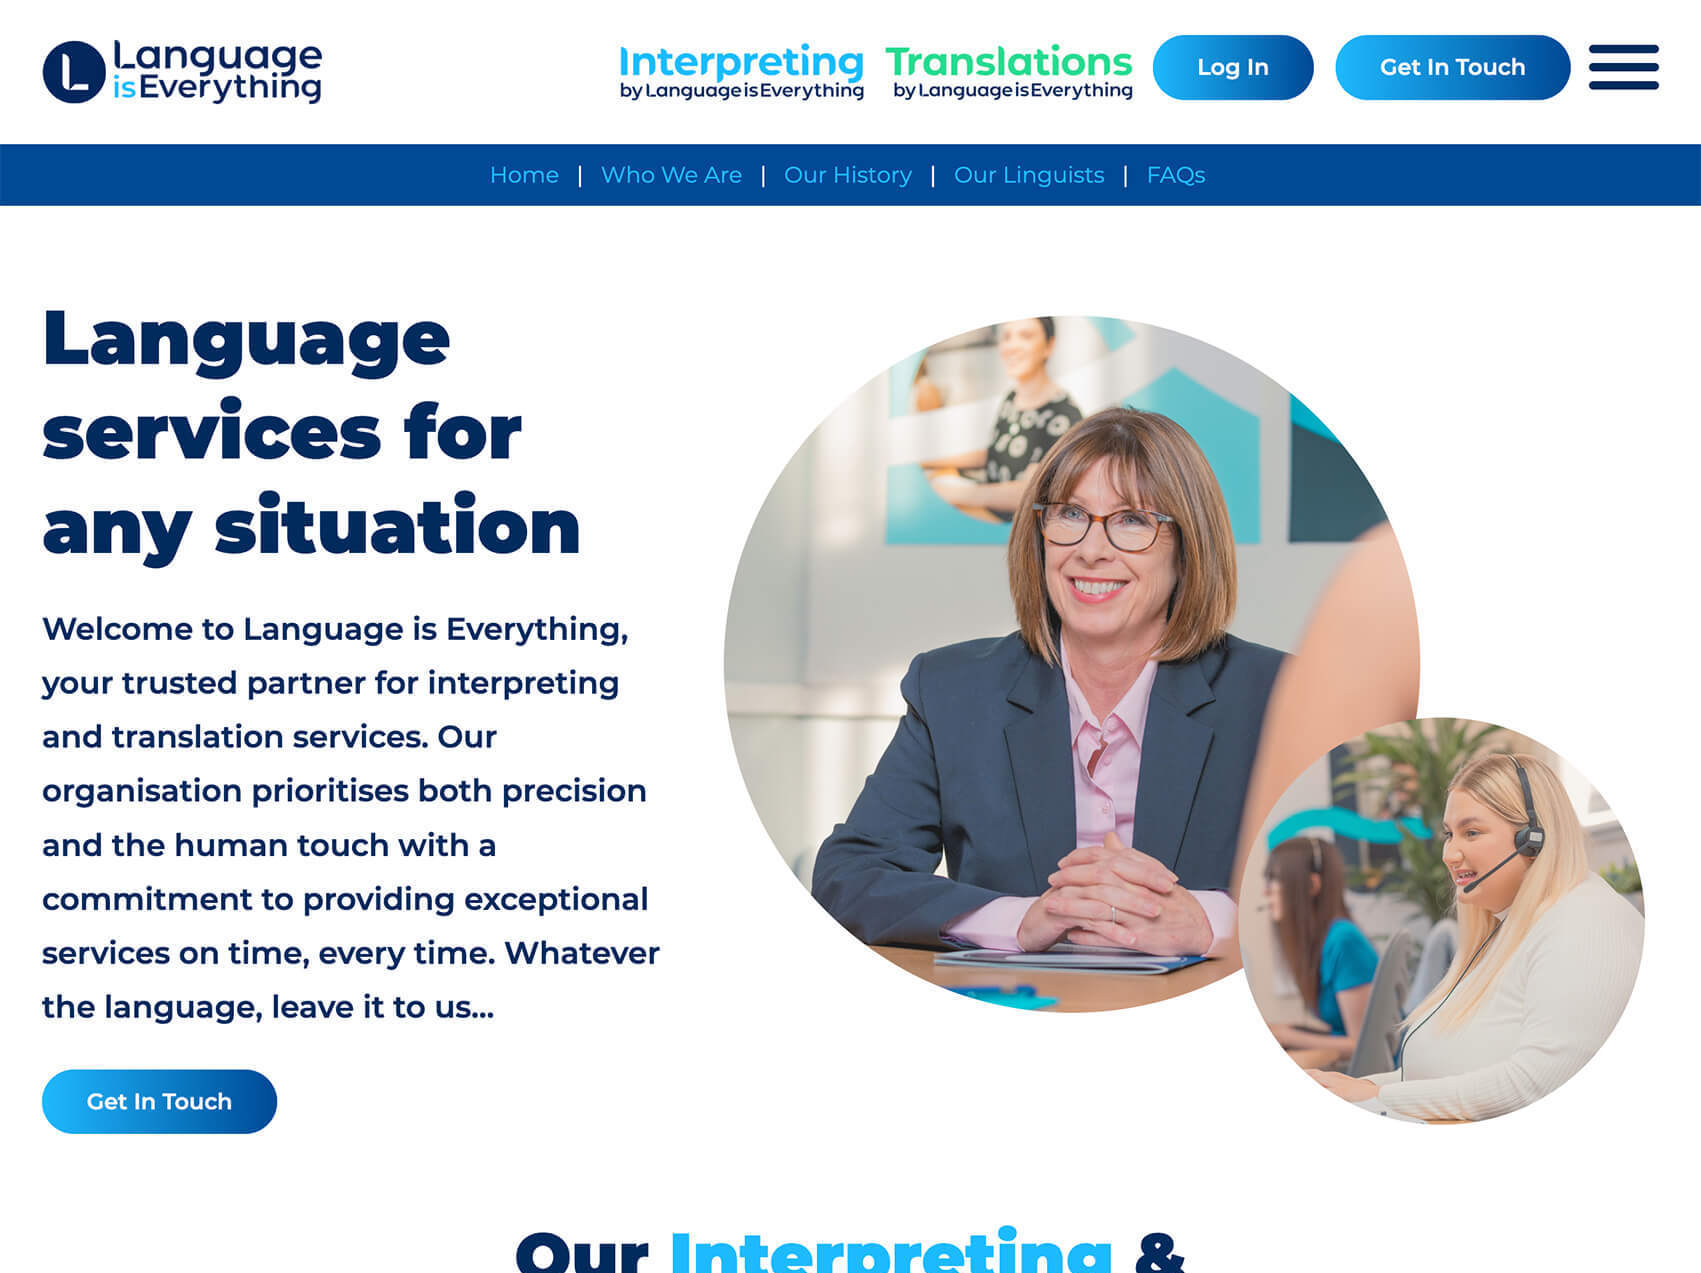 Language Is Everything itseeze hull website screen